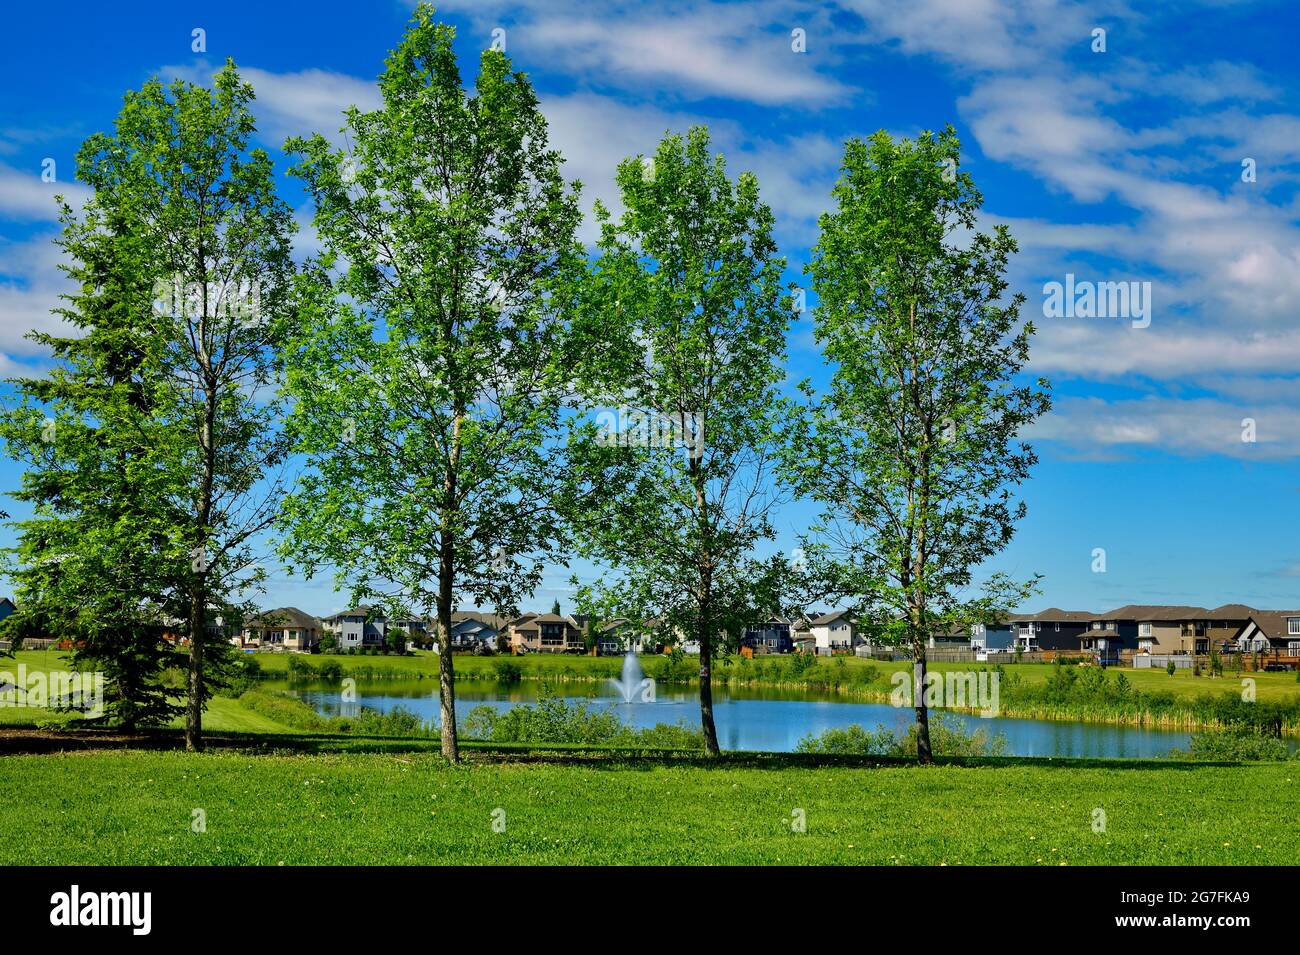 An urban landscape with a green space, trees, a pond, houses and blue sky in Morinville Alberta Canada. Stock Photo